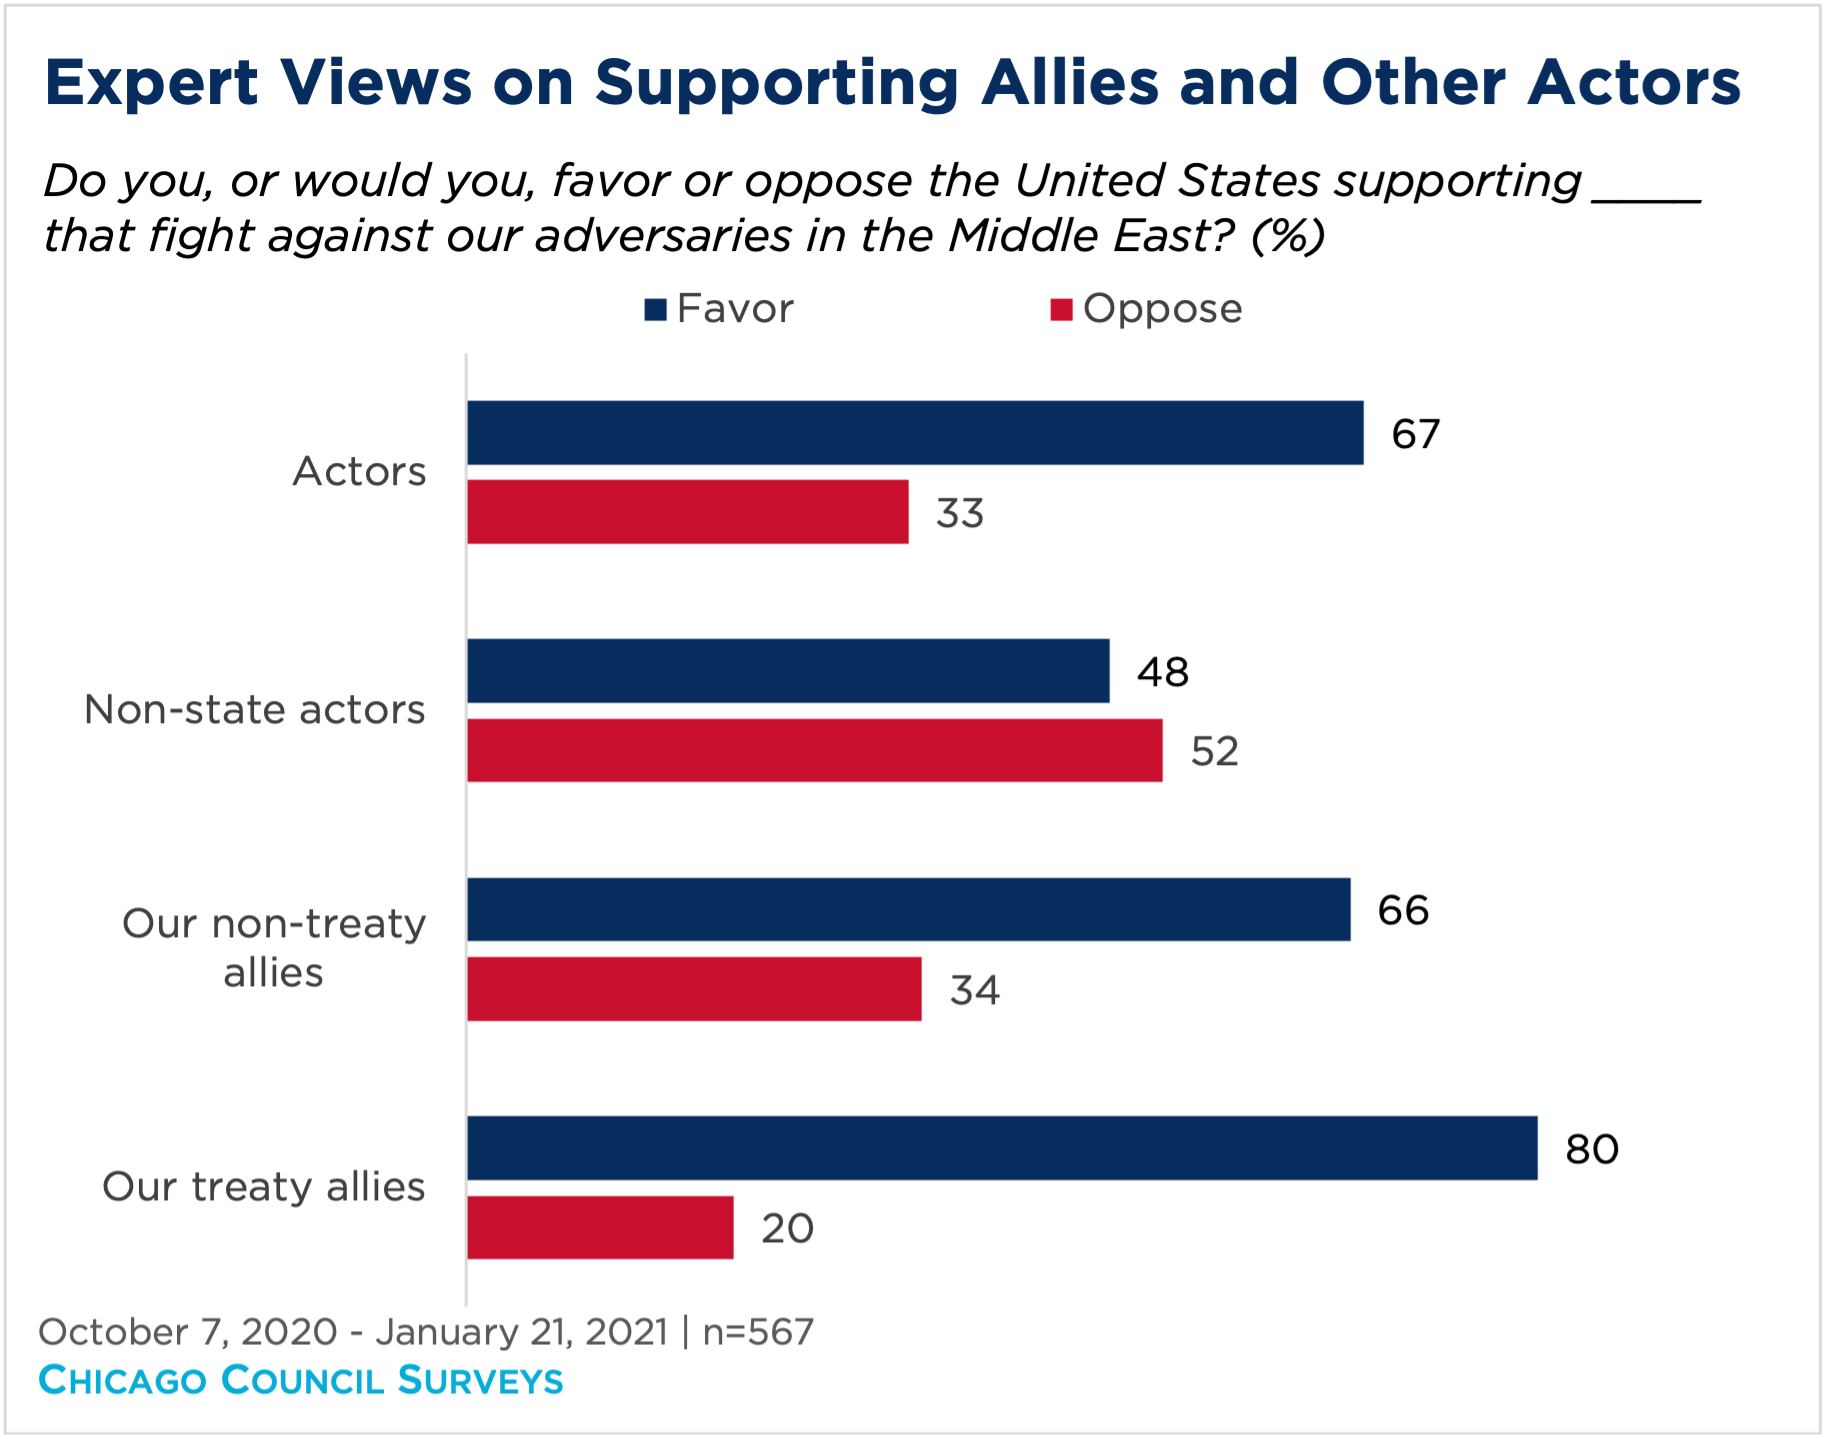 Bar graph showing experts views on supporting allies